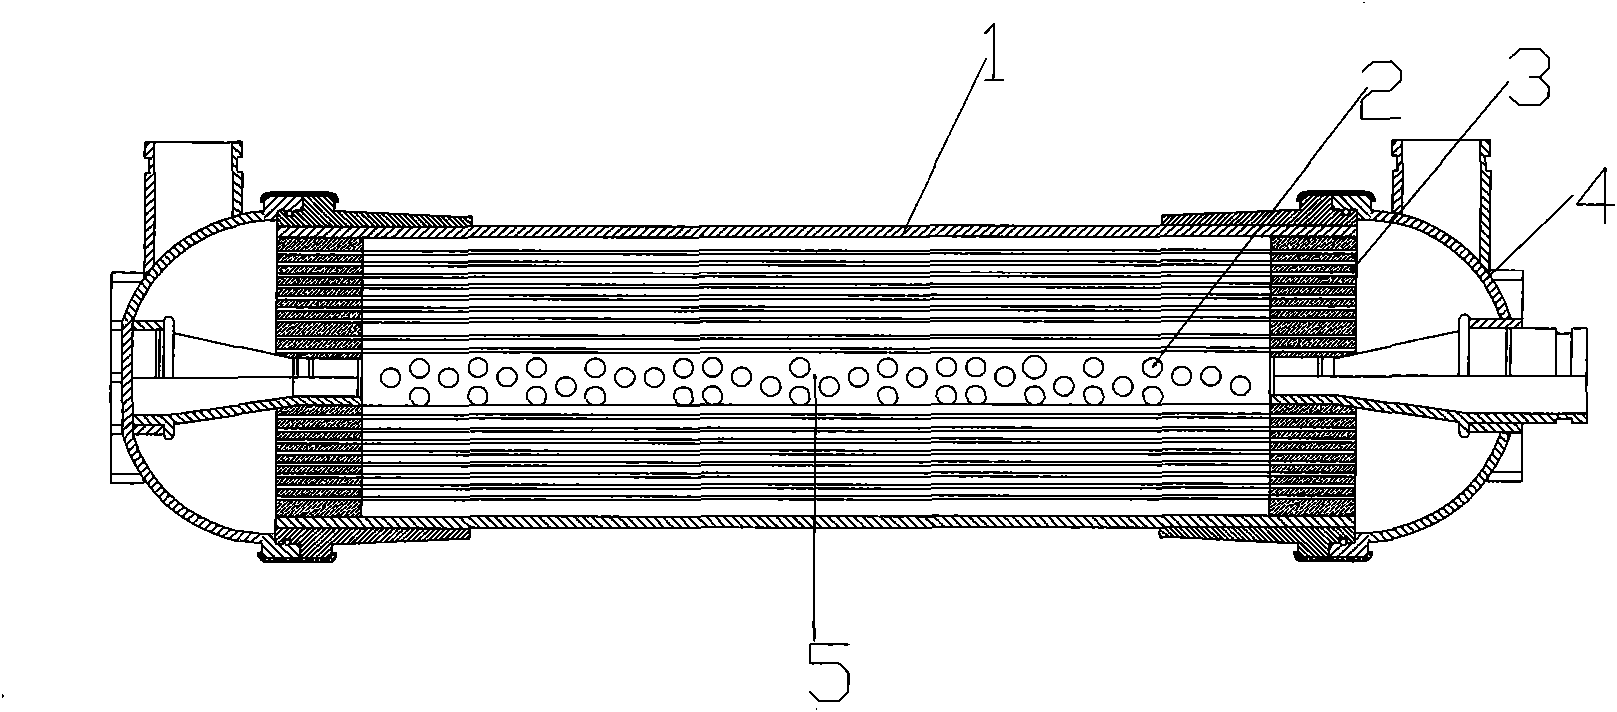 Hollow fiber ultra-filtration membrane assembly having improved central conduit structure